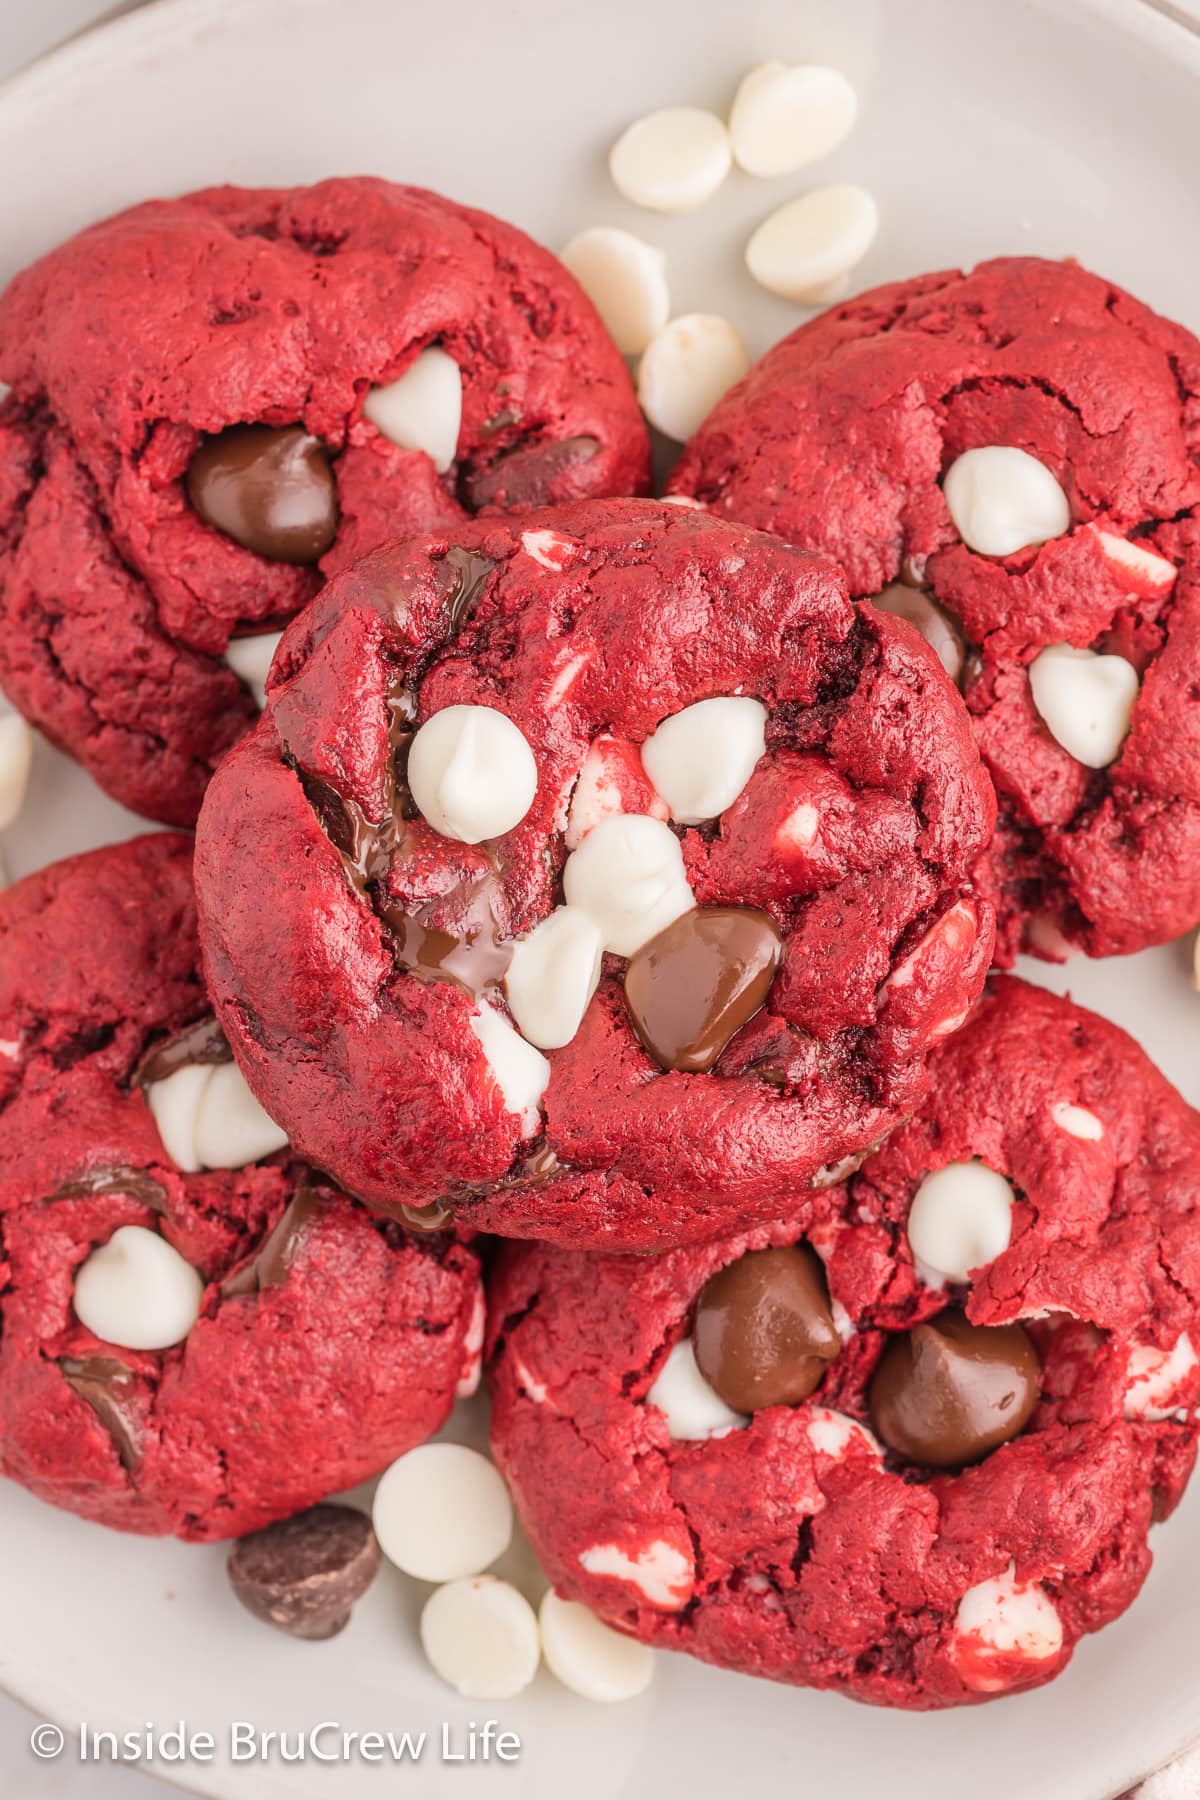 A pile of red velvet cookies with chocolate chips on a plate.